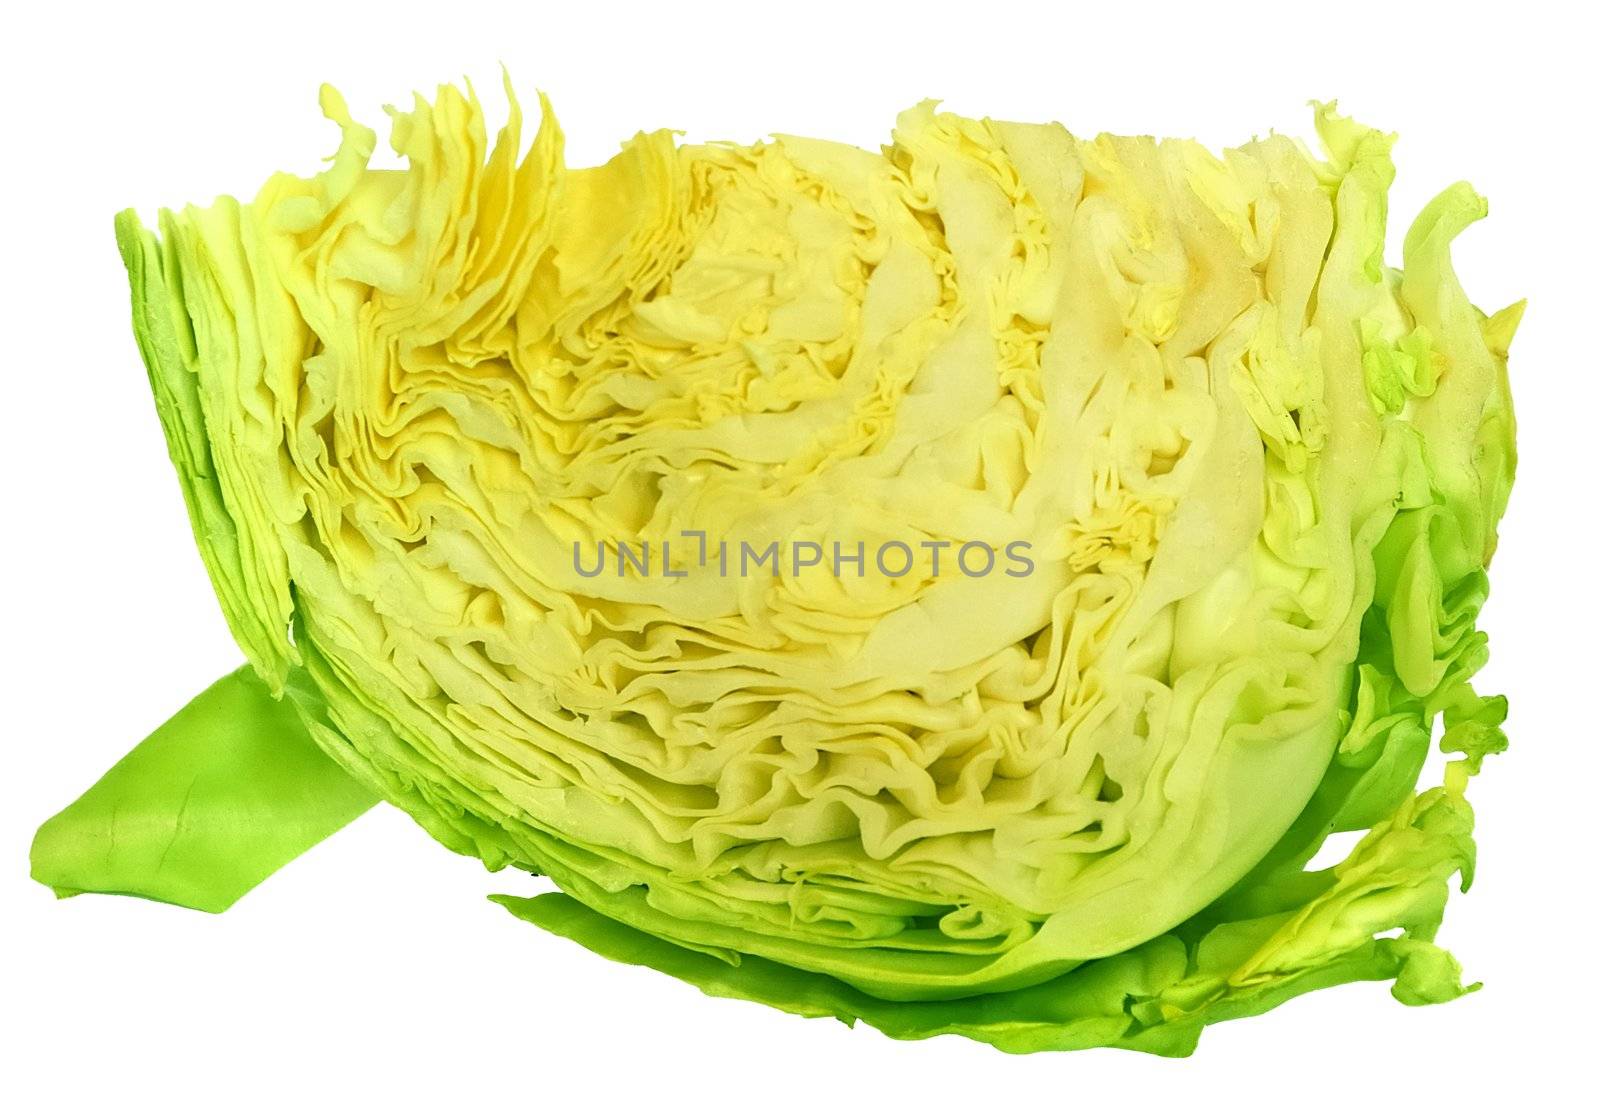 part of fresh head of cabbage with a visible underlying structure